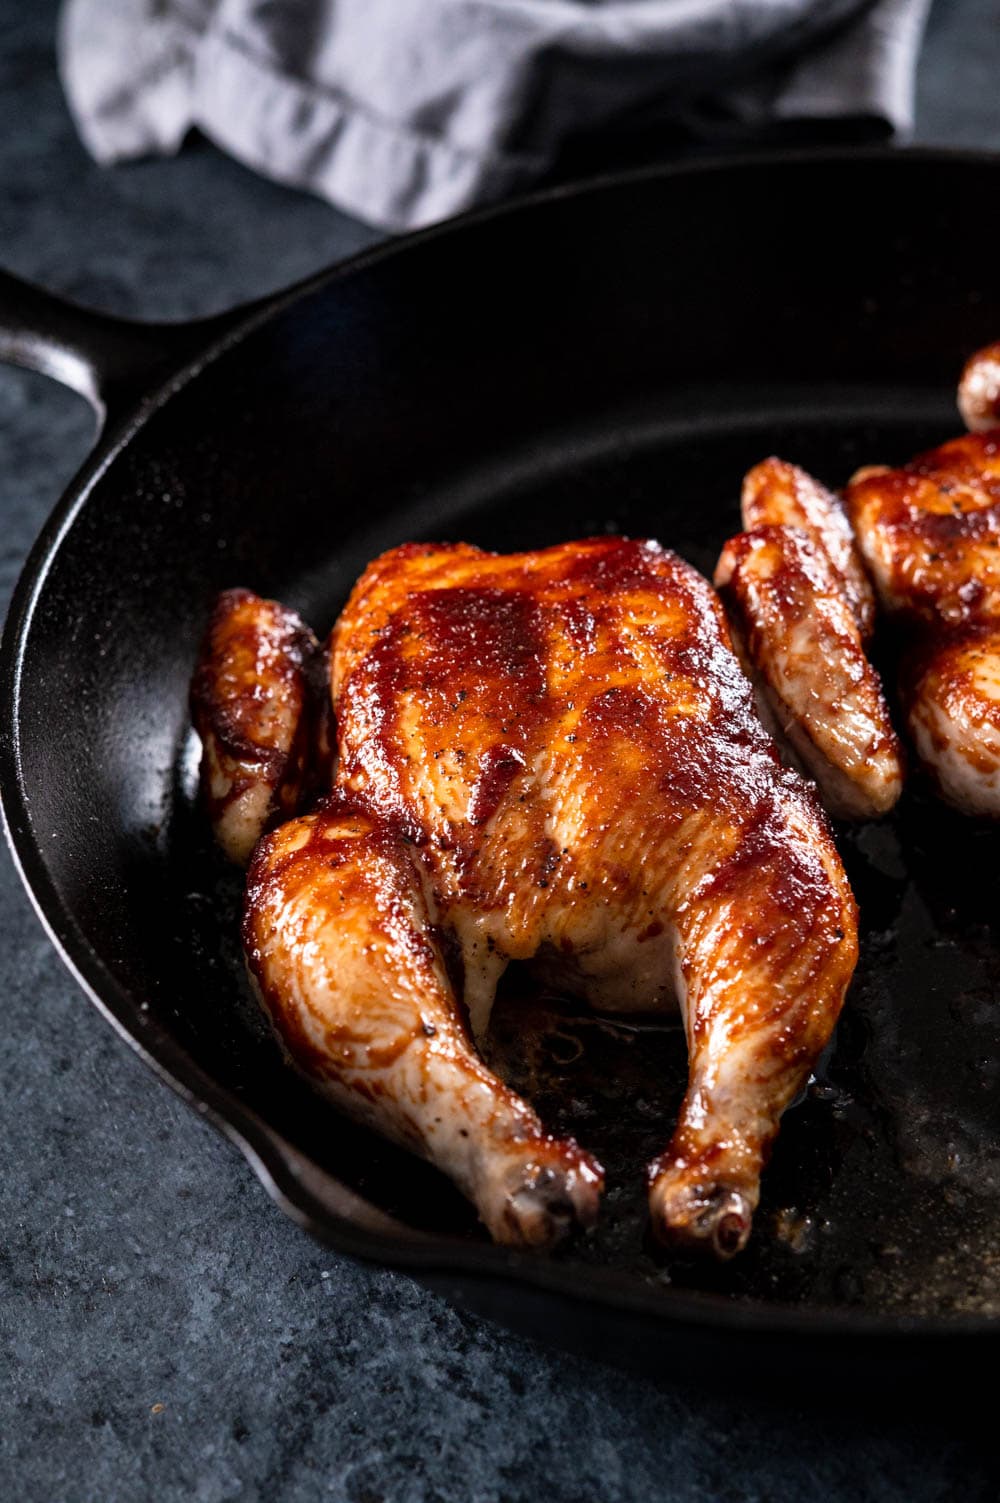 Poussins with bbq sauce in a cast iron skillet.